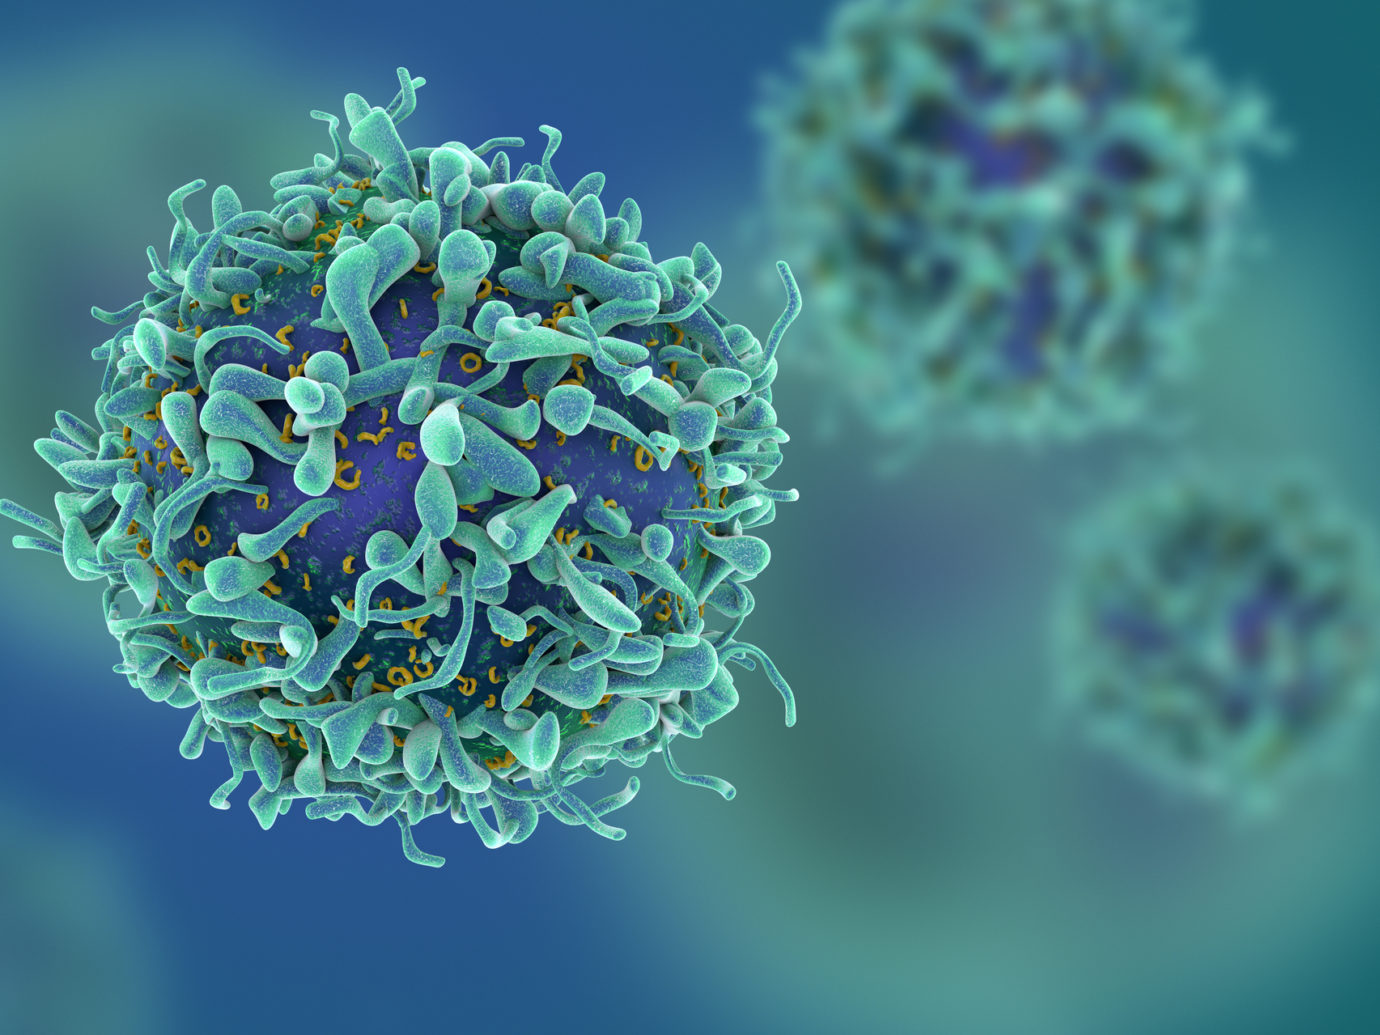 CG render of T-cells in shallow depth of field